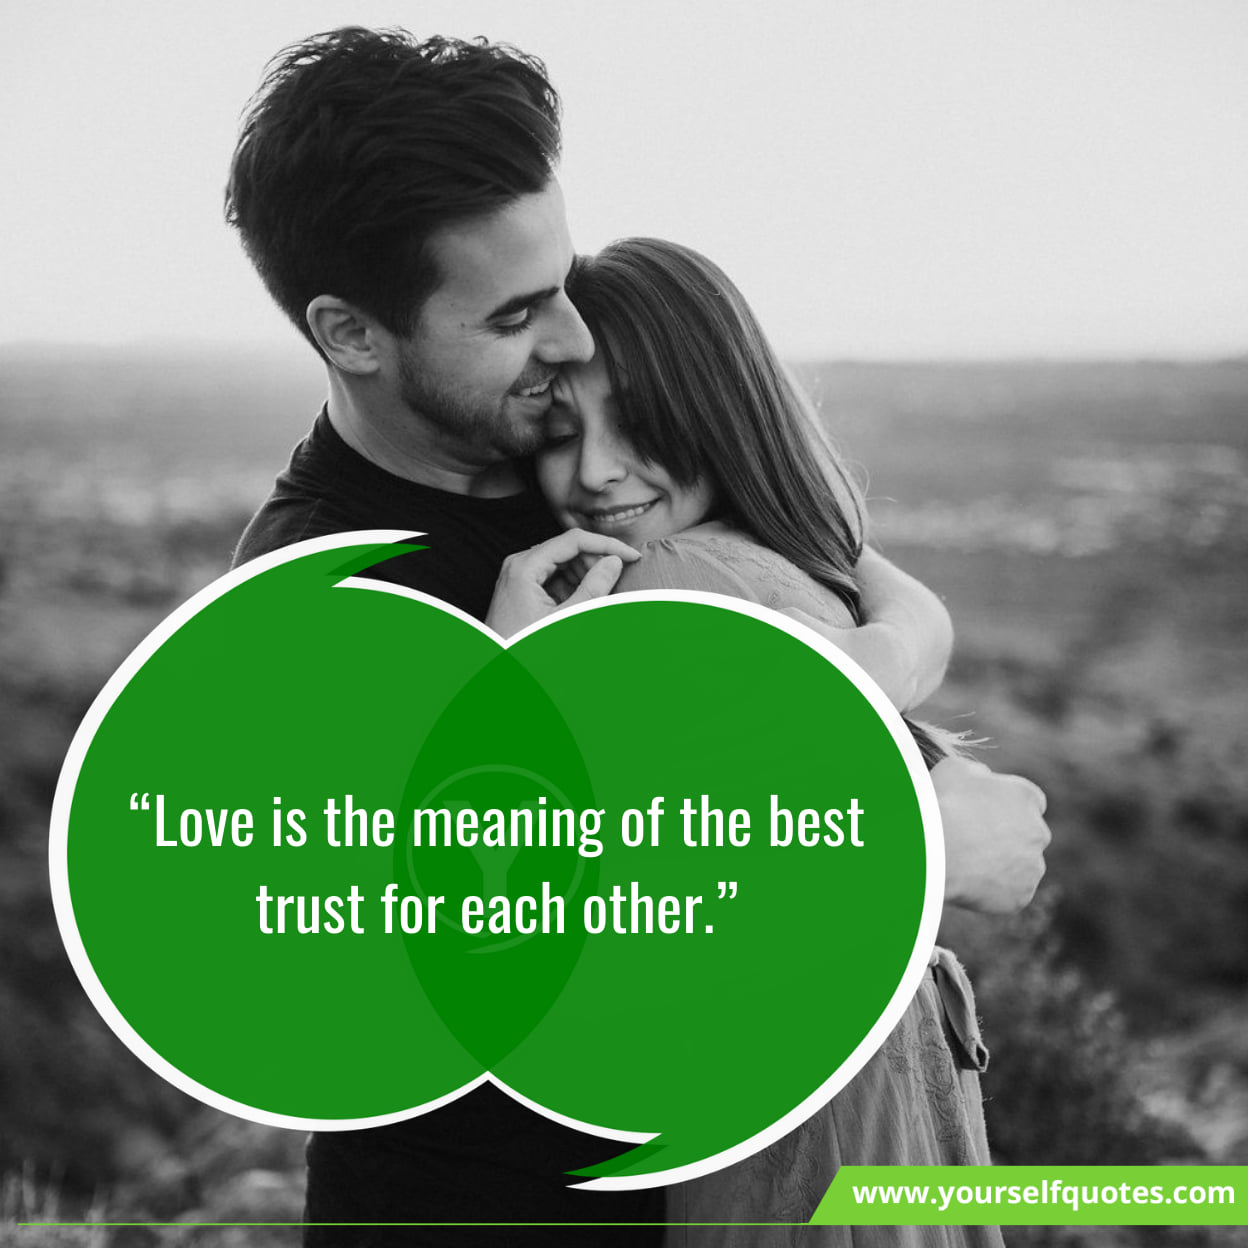 Famous Quotes On True Love